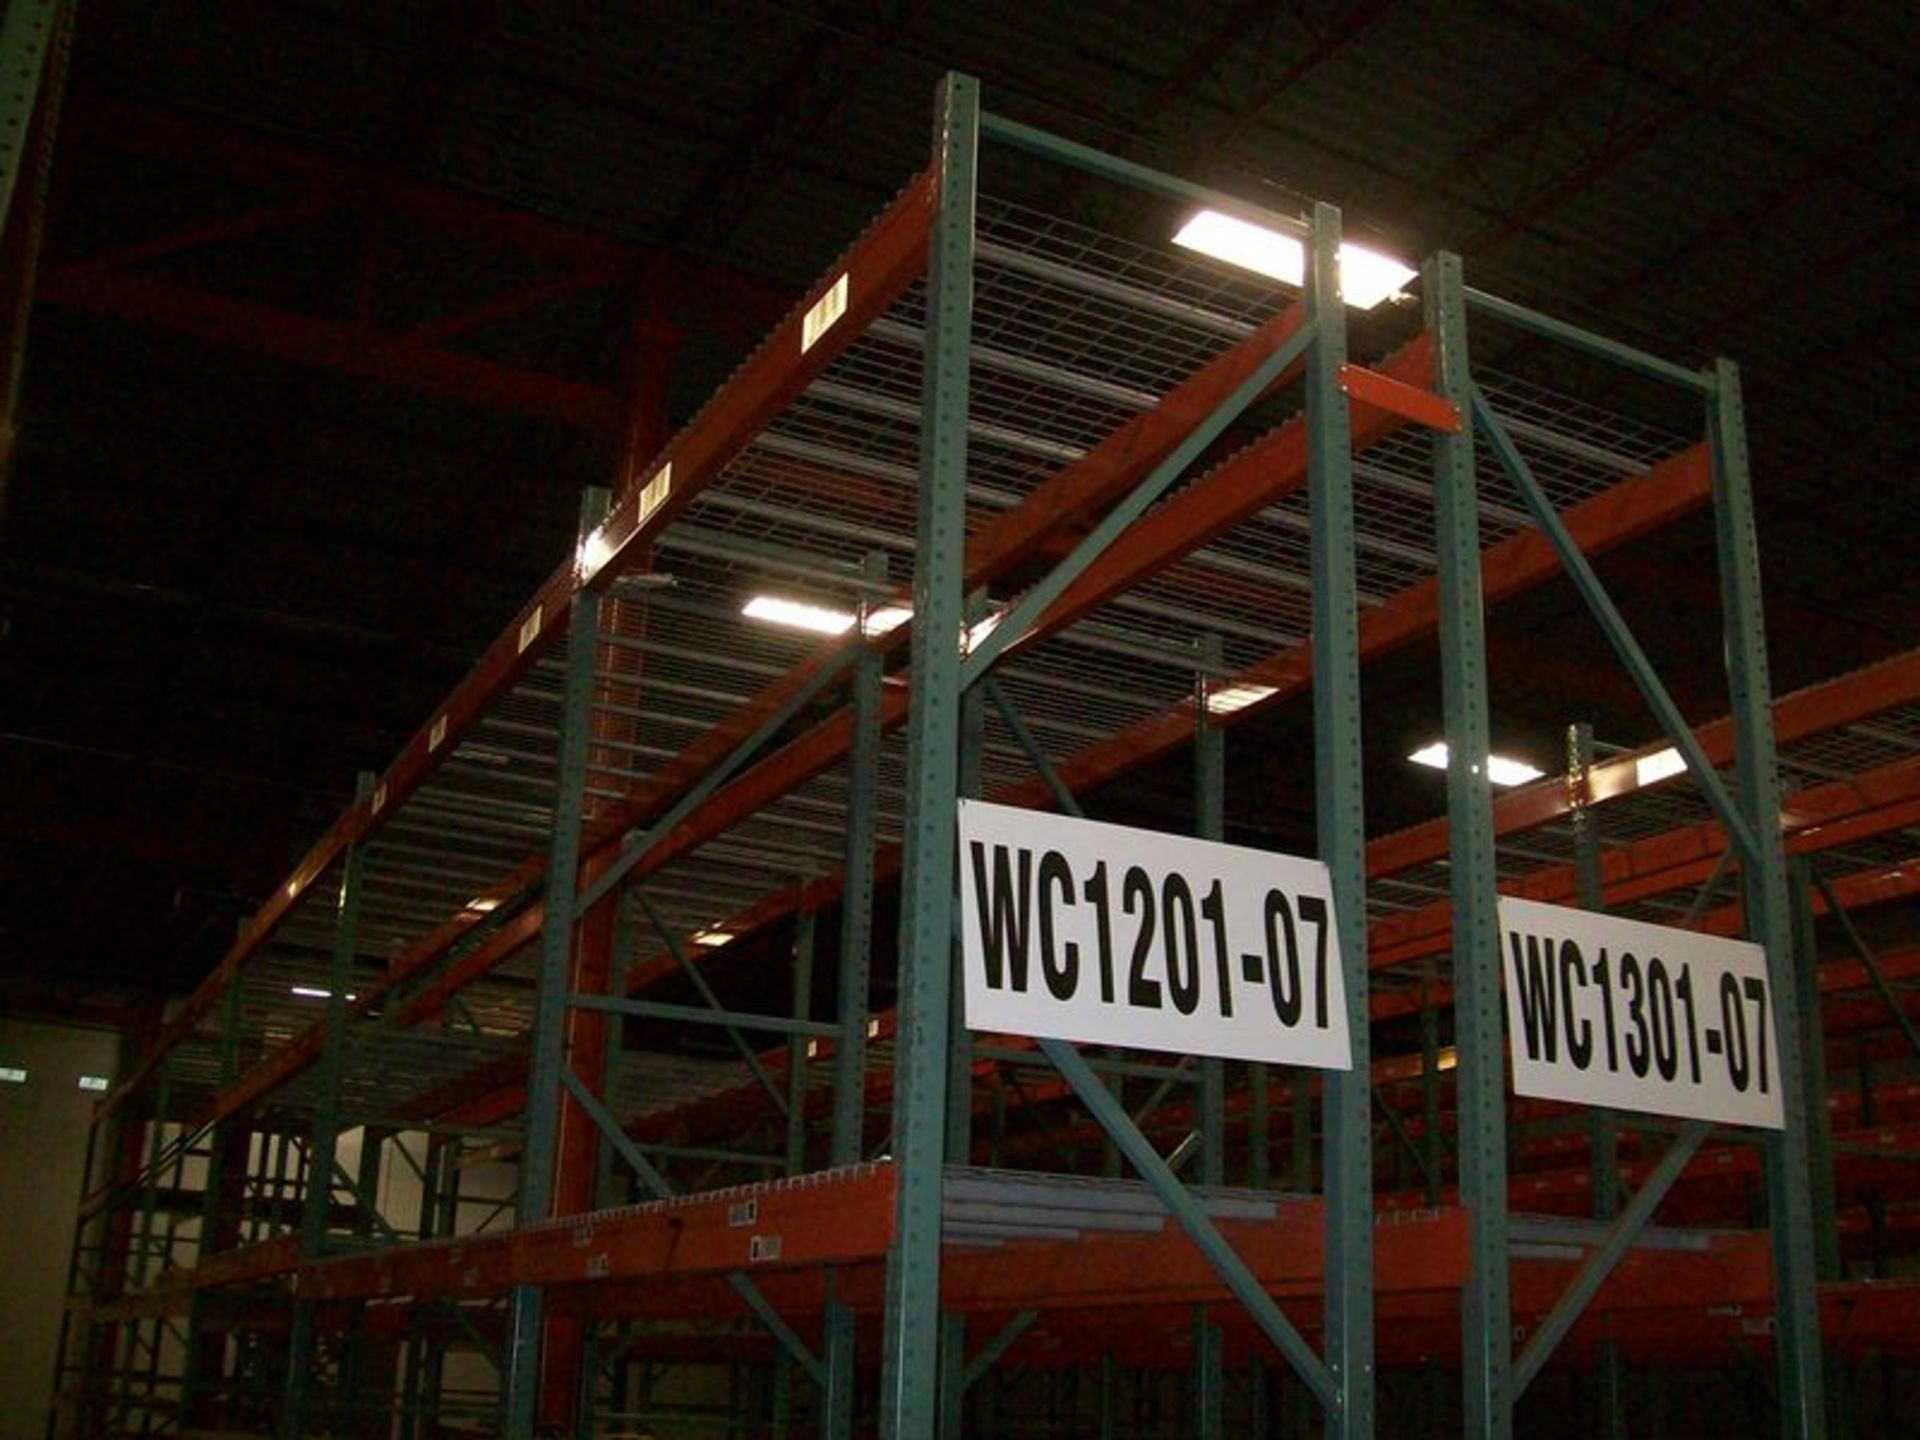 Lot of (12) sections Interack cup style pallet rack, (14) 14' high, 3" x 3" uprights, (60) 12'